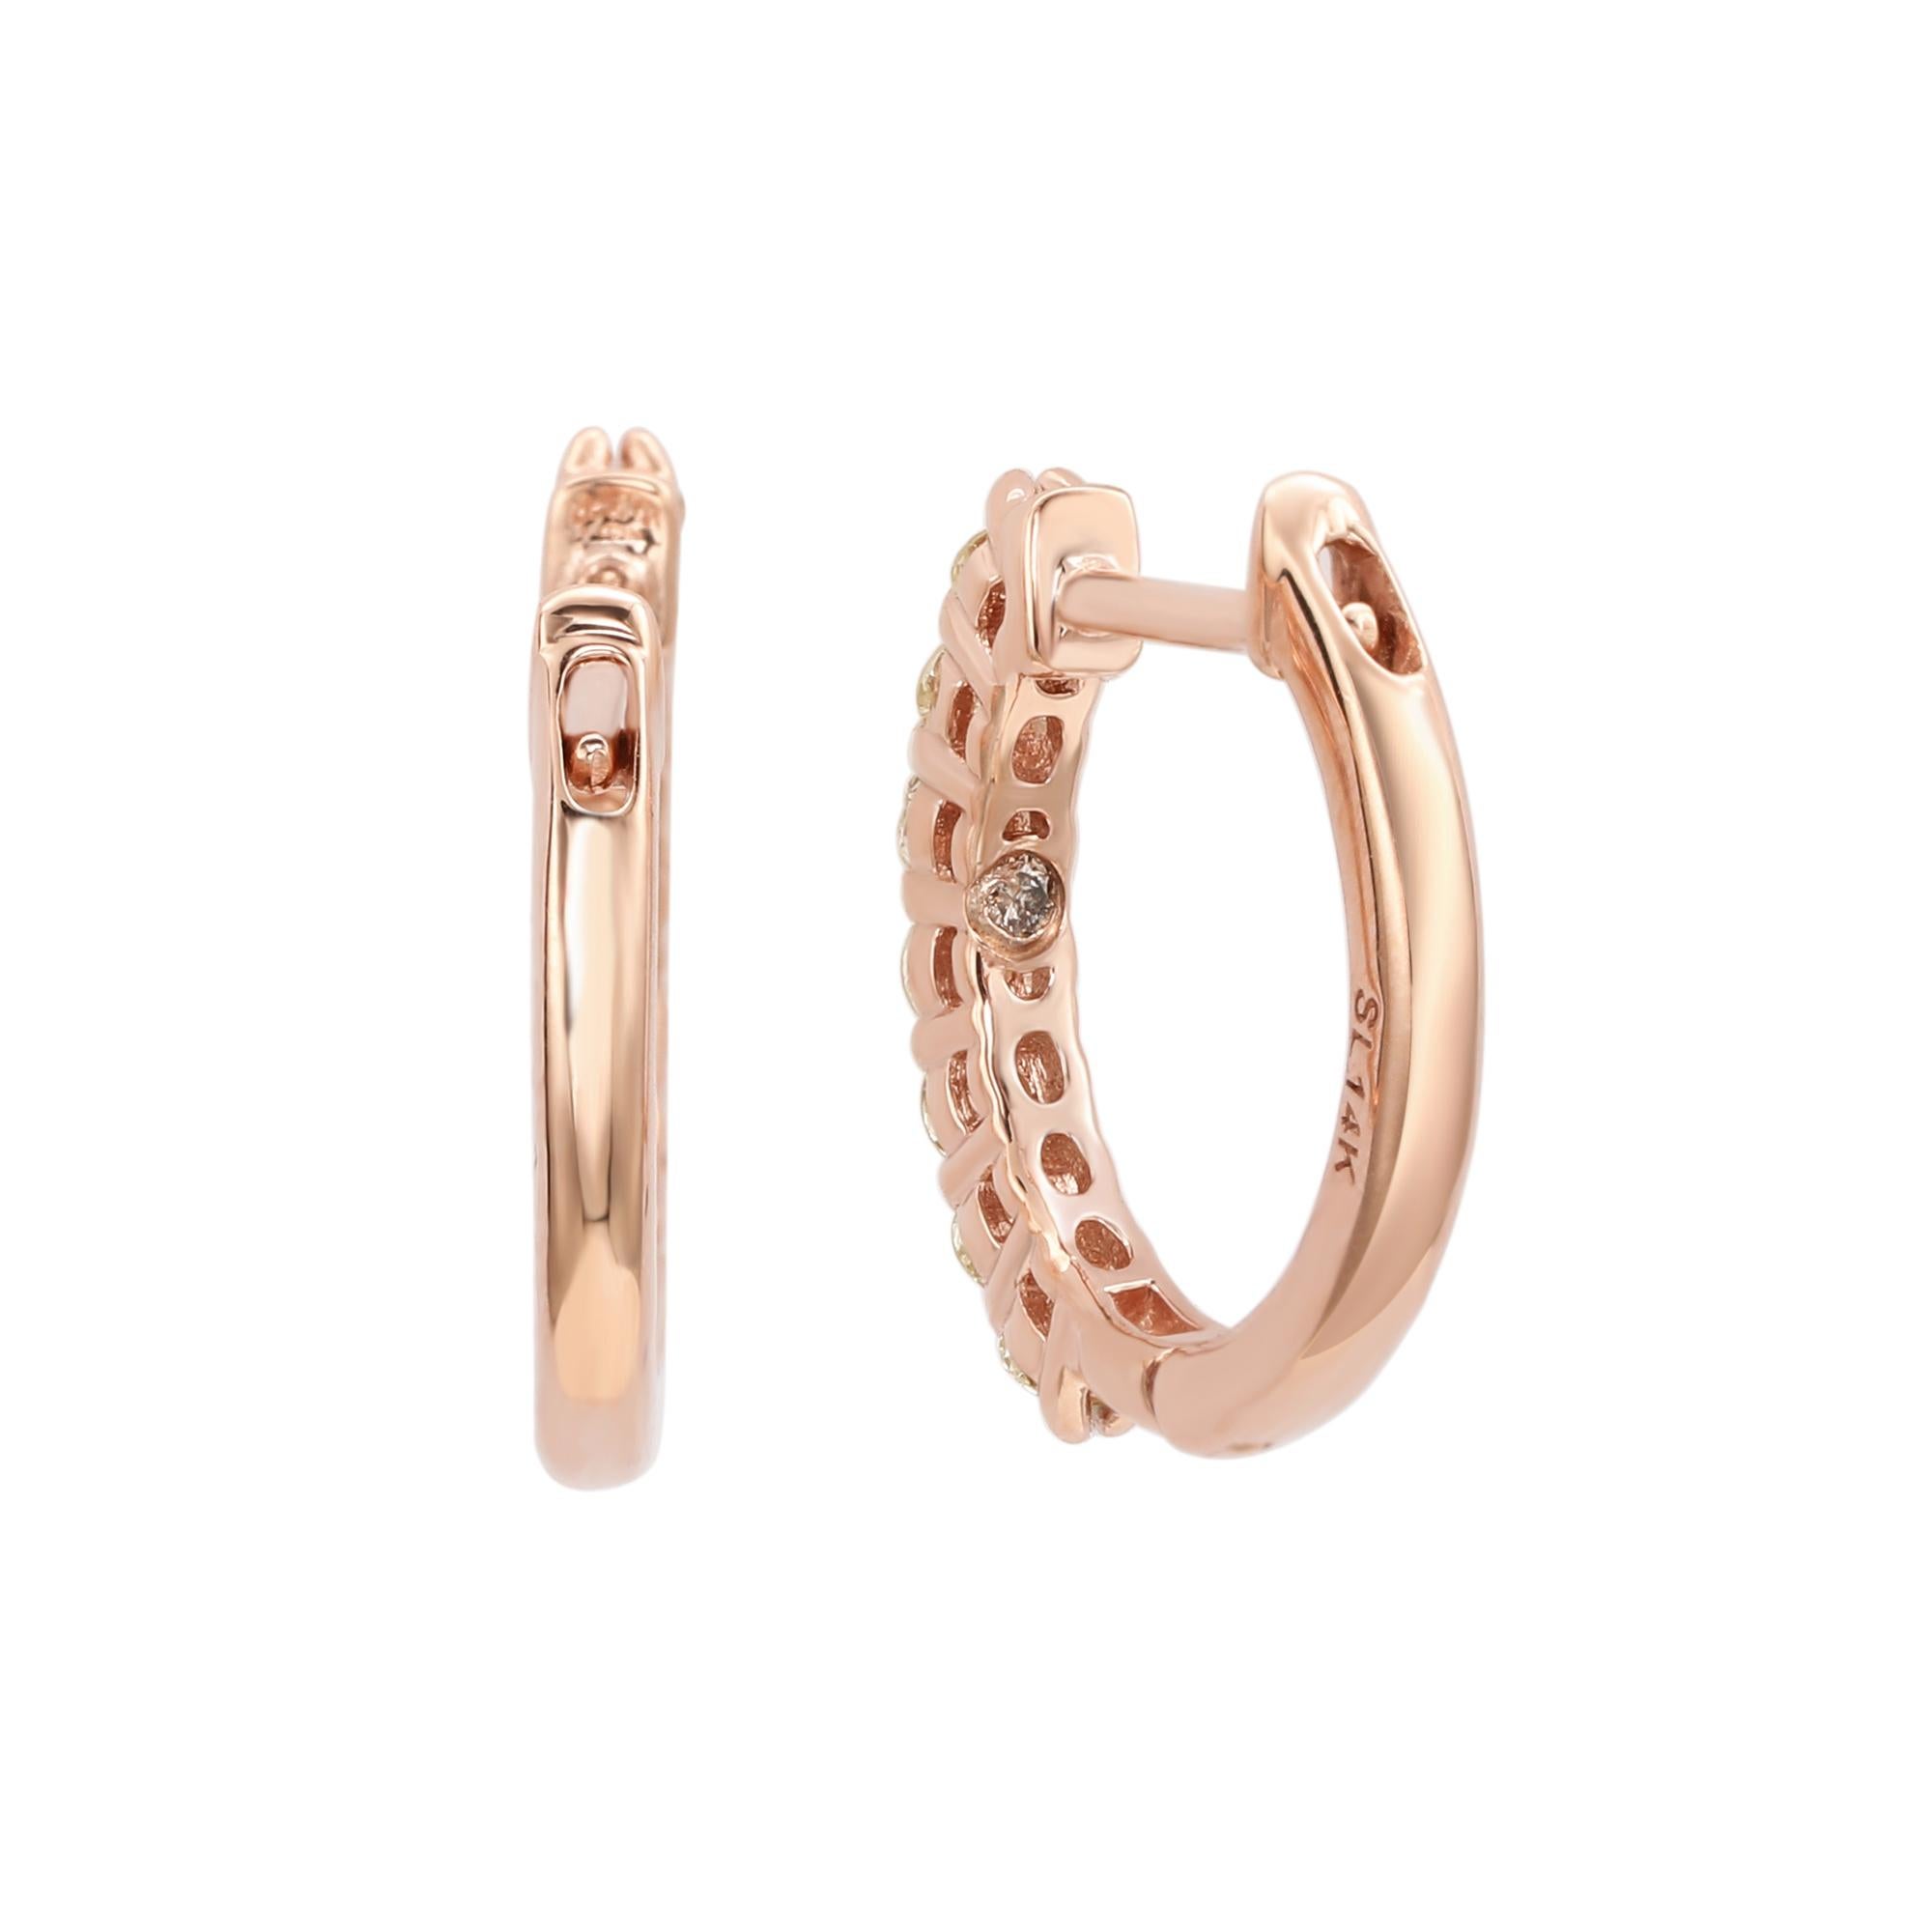 Make a statement with stunning huggie hoop earrings, perfect for women of all ages. These huggie hoop earrings feature a single row of round cut white diamonds set in 14k rose gold. These hoops are crafted of sparkling diamonds going down the outer